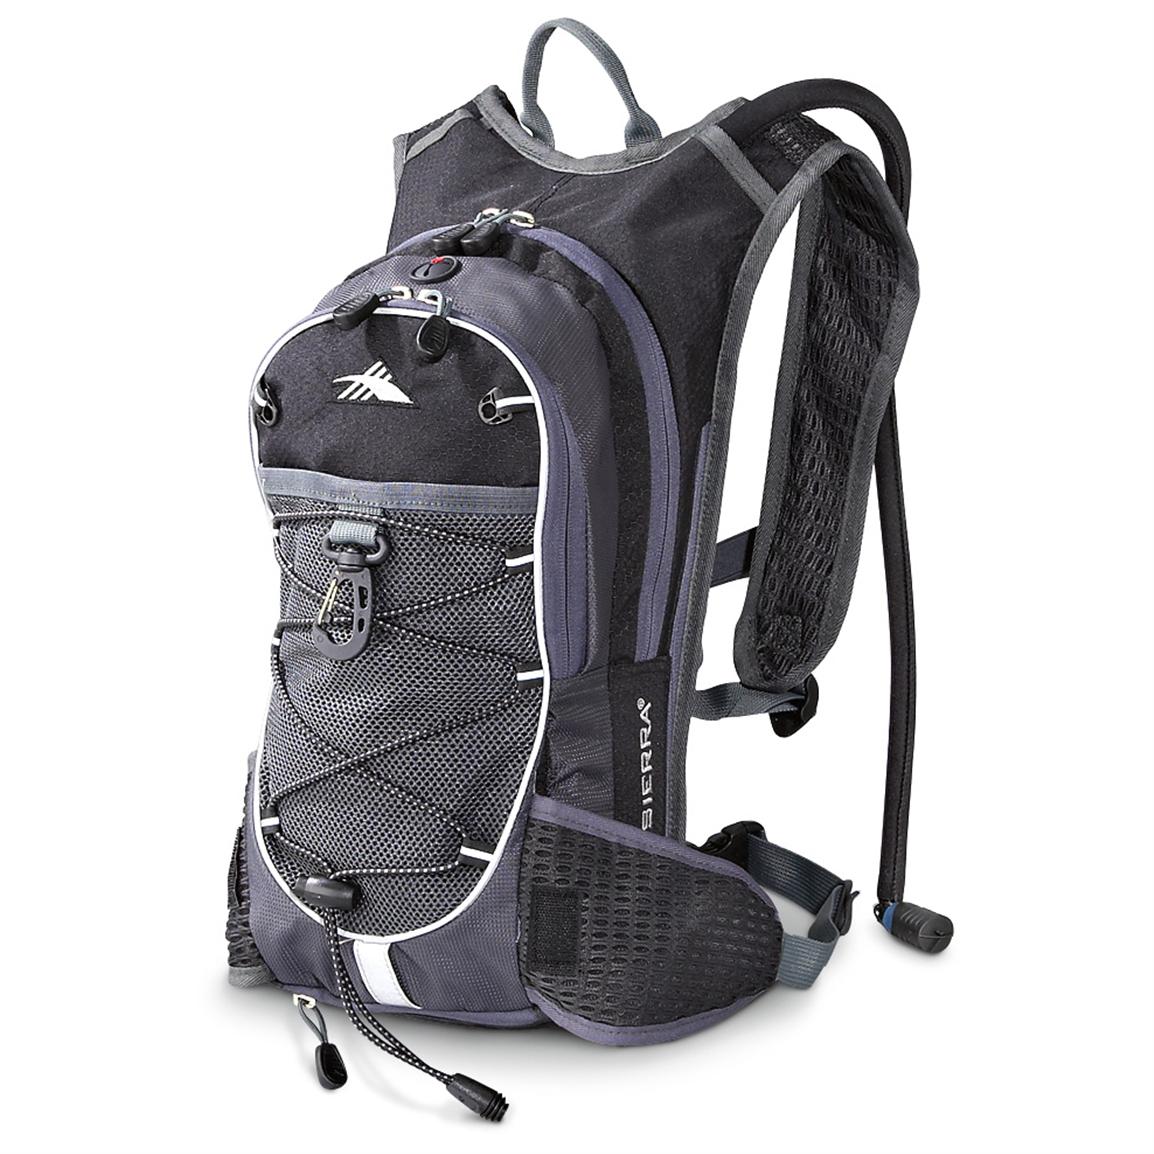 Hydration pack review 2015 highlander, high sierra whitewater hydration ...